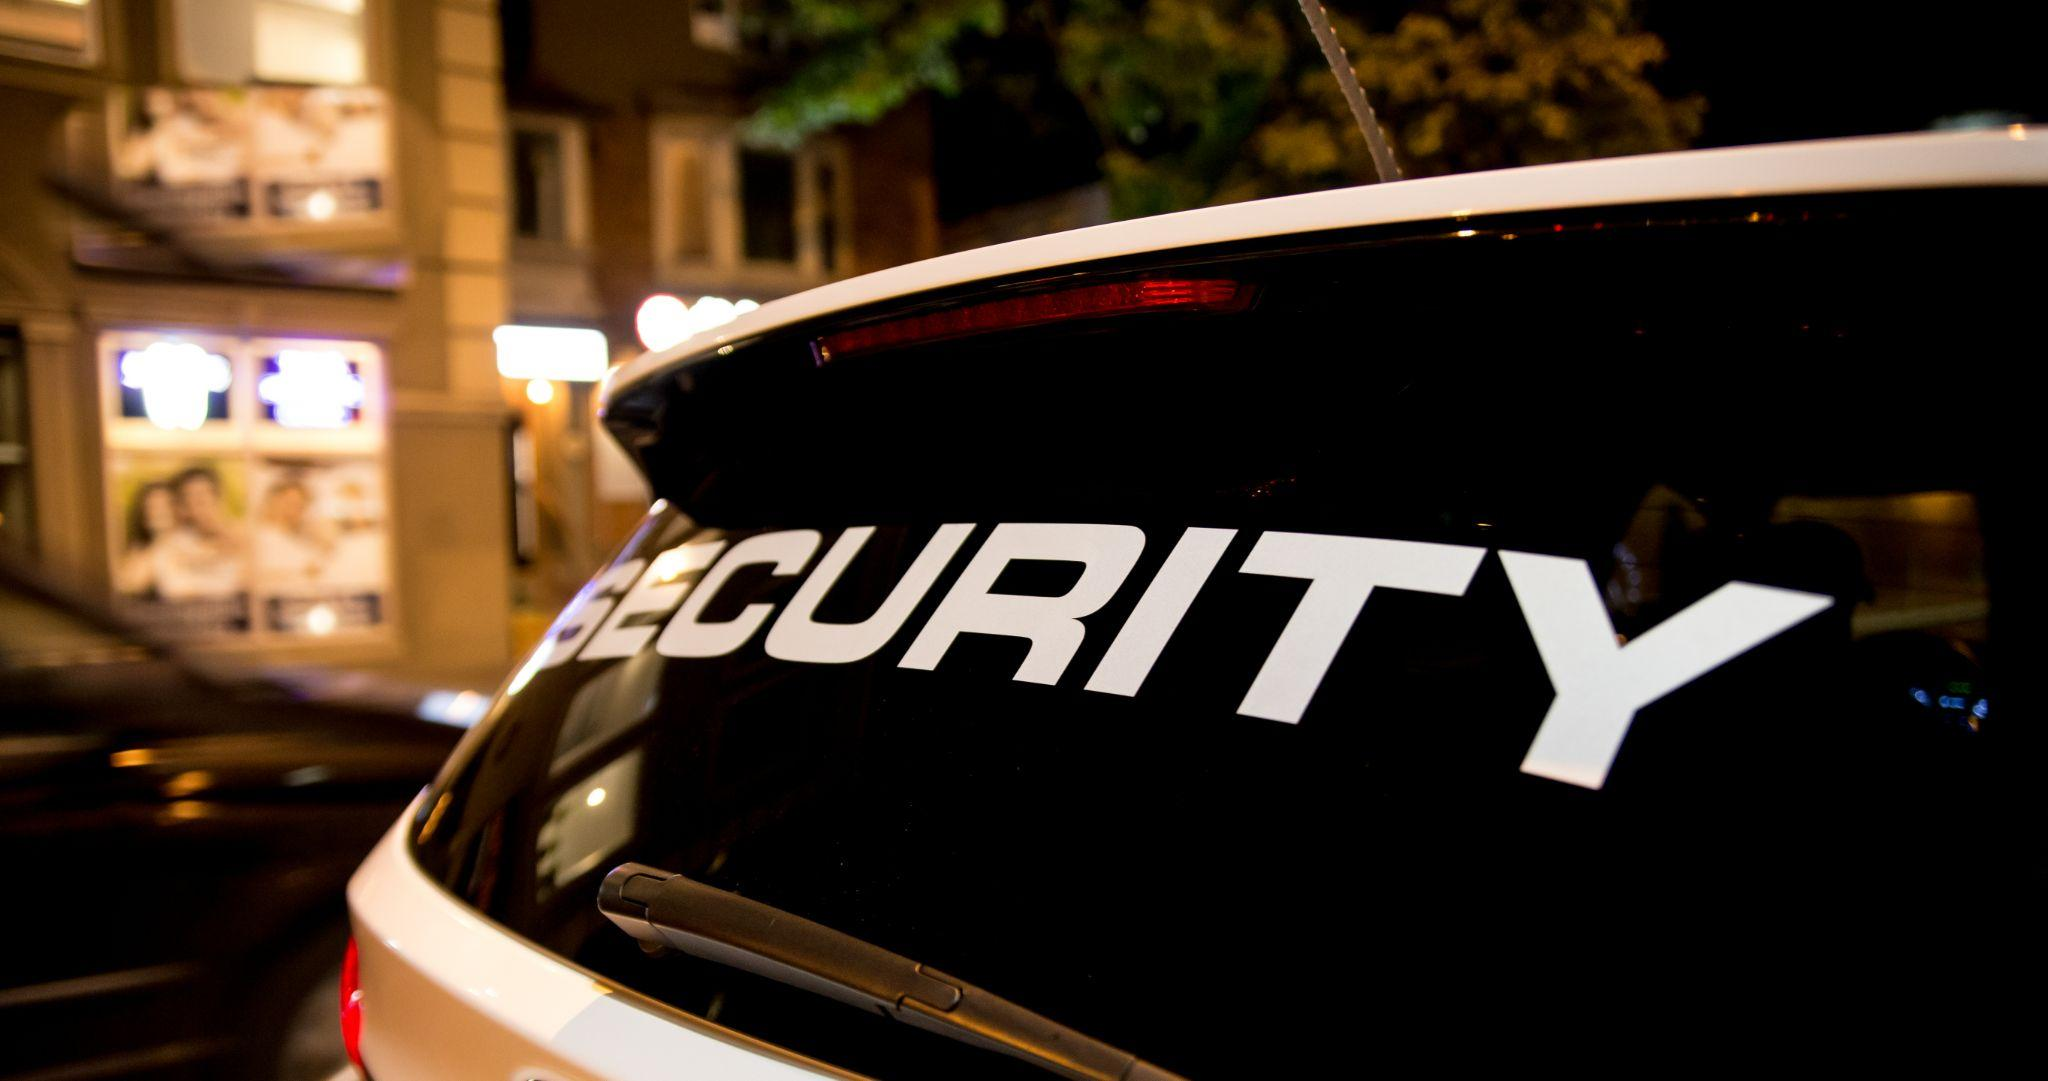 https://armstrongguardservices.com/mobile-patrol-services-in-los-angeles-to-keep-your-premises-safe/